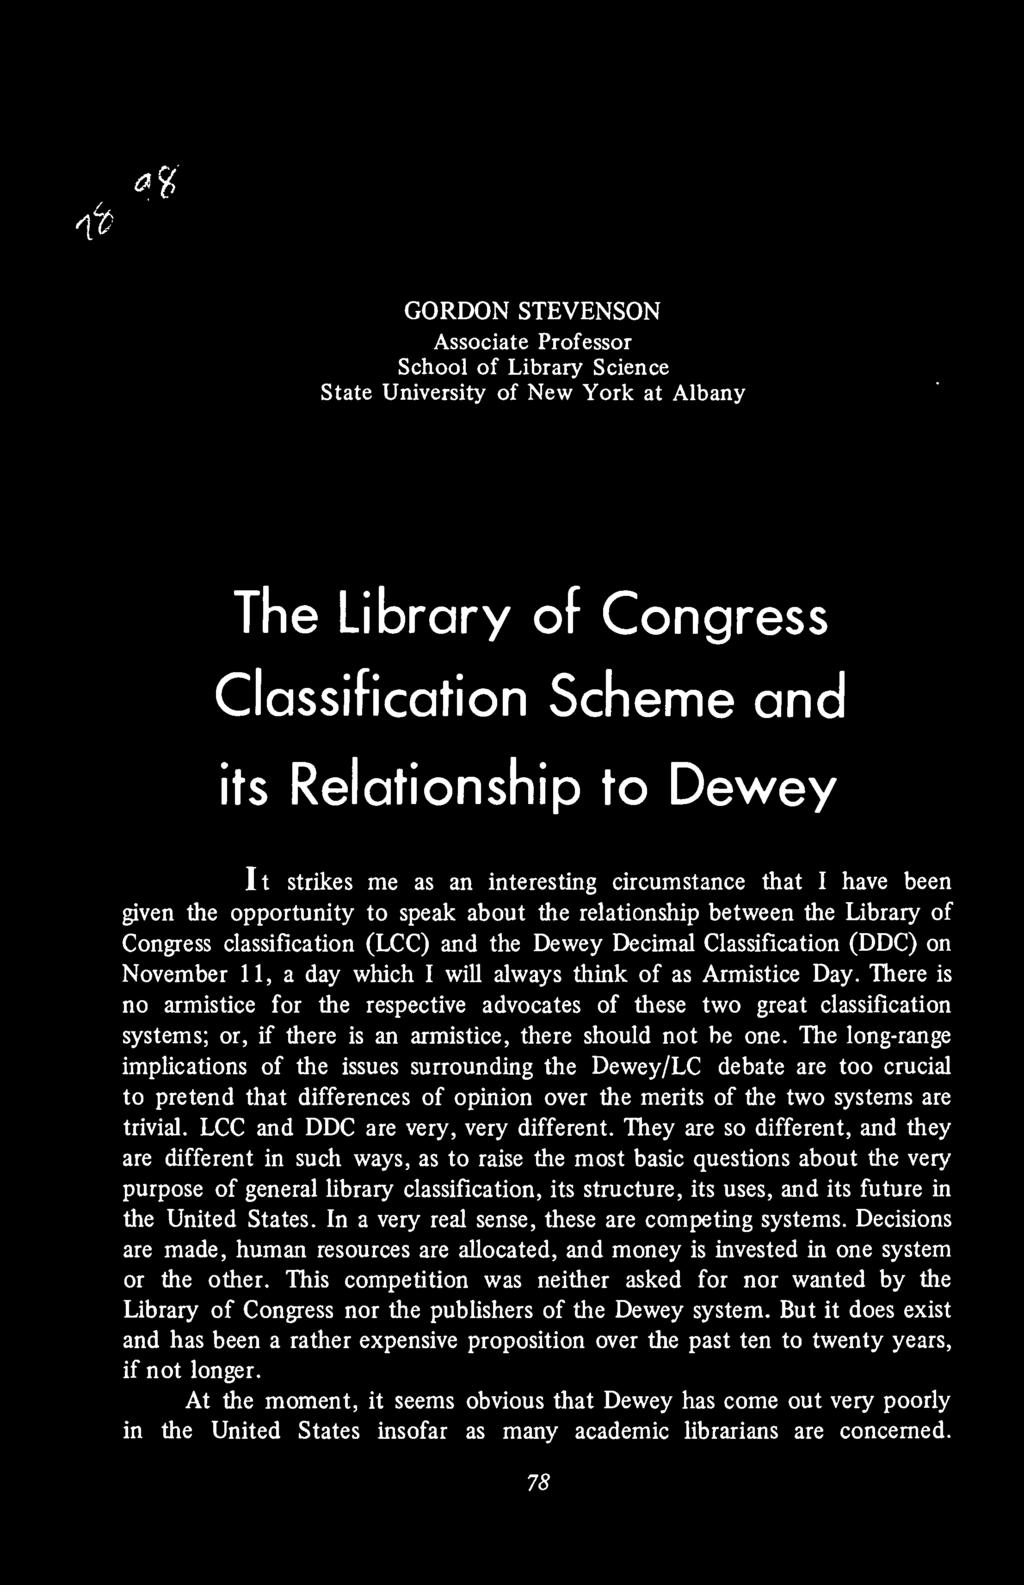 The long-range implications of the issues surrounding the Dewey/LC debate are too crucial to pretend that differences of opinion over the merits of the two systems are trivial.